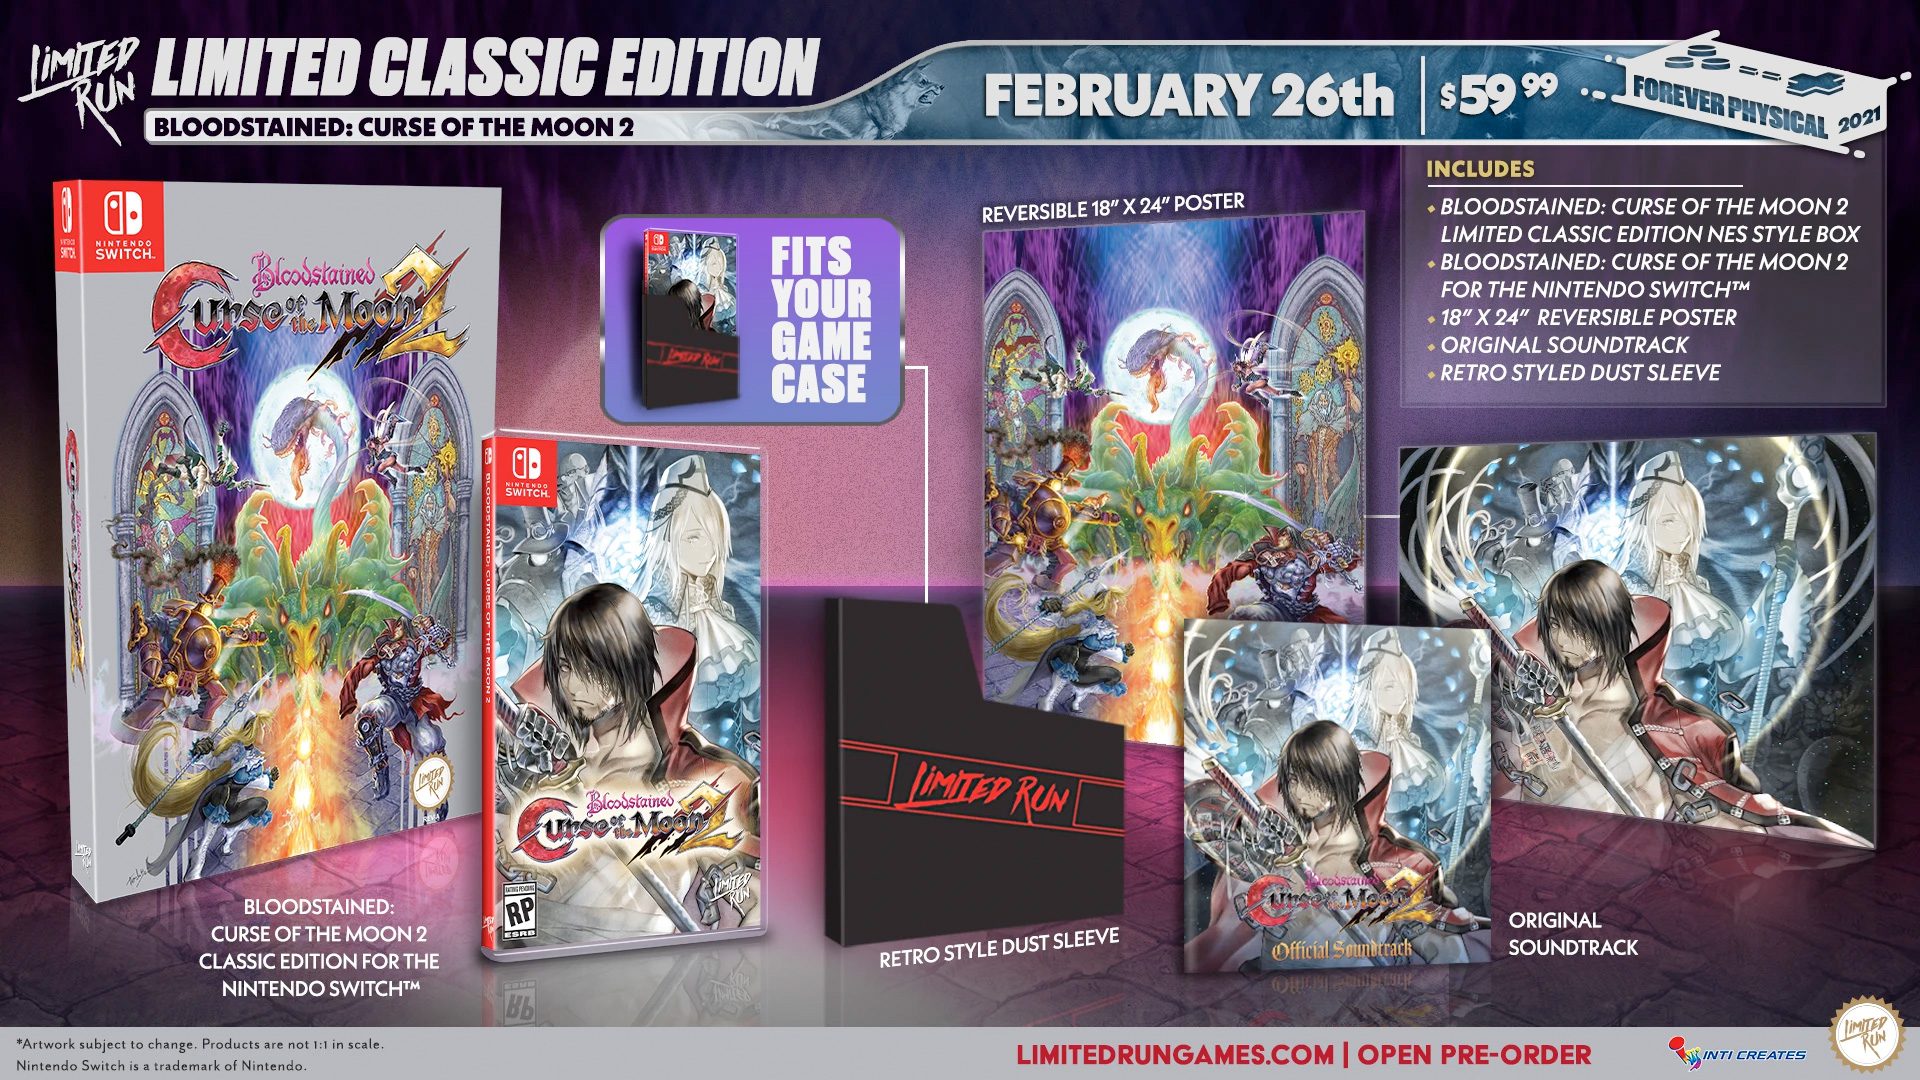 Tom duBois is back for the Classic Edition of Bloodstained: Curse of the Moon 2